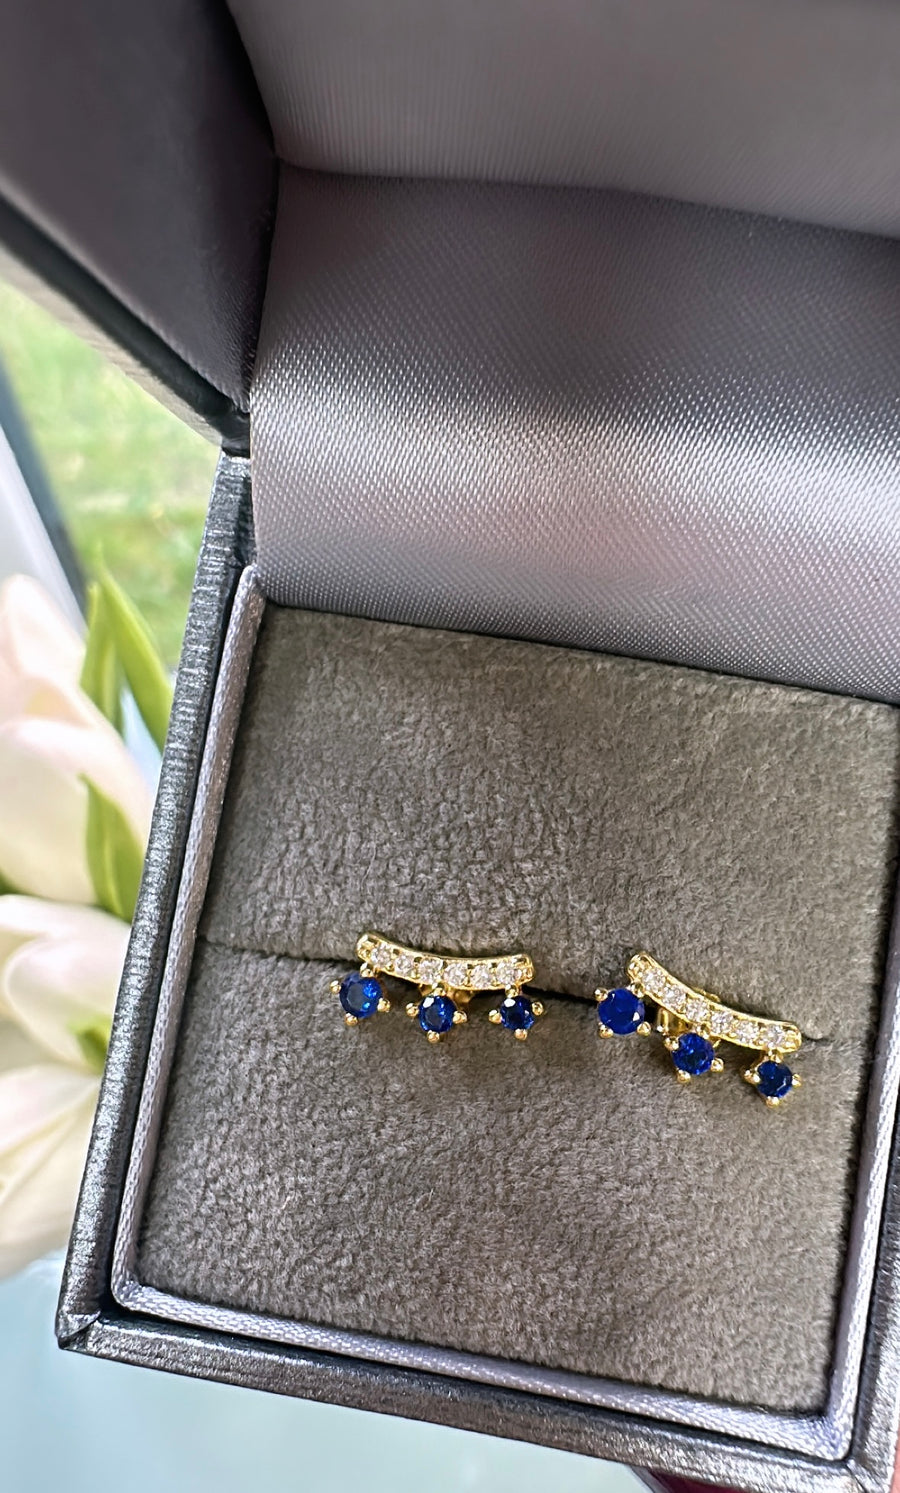 Sophia sapphire Studs- Gold & Silver Available